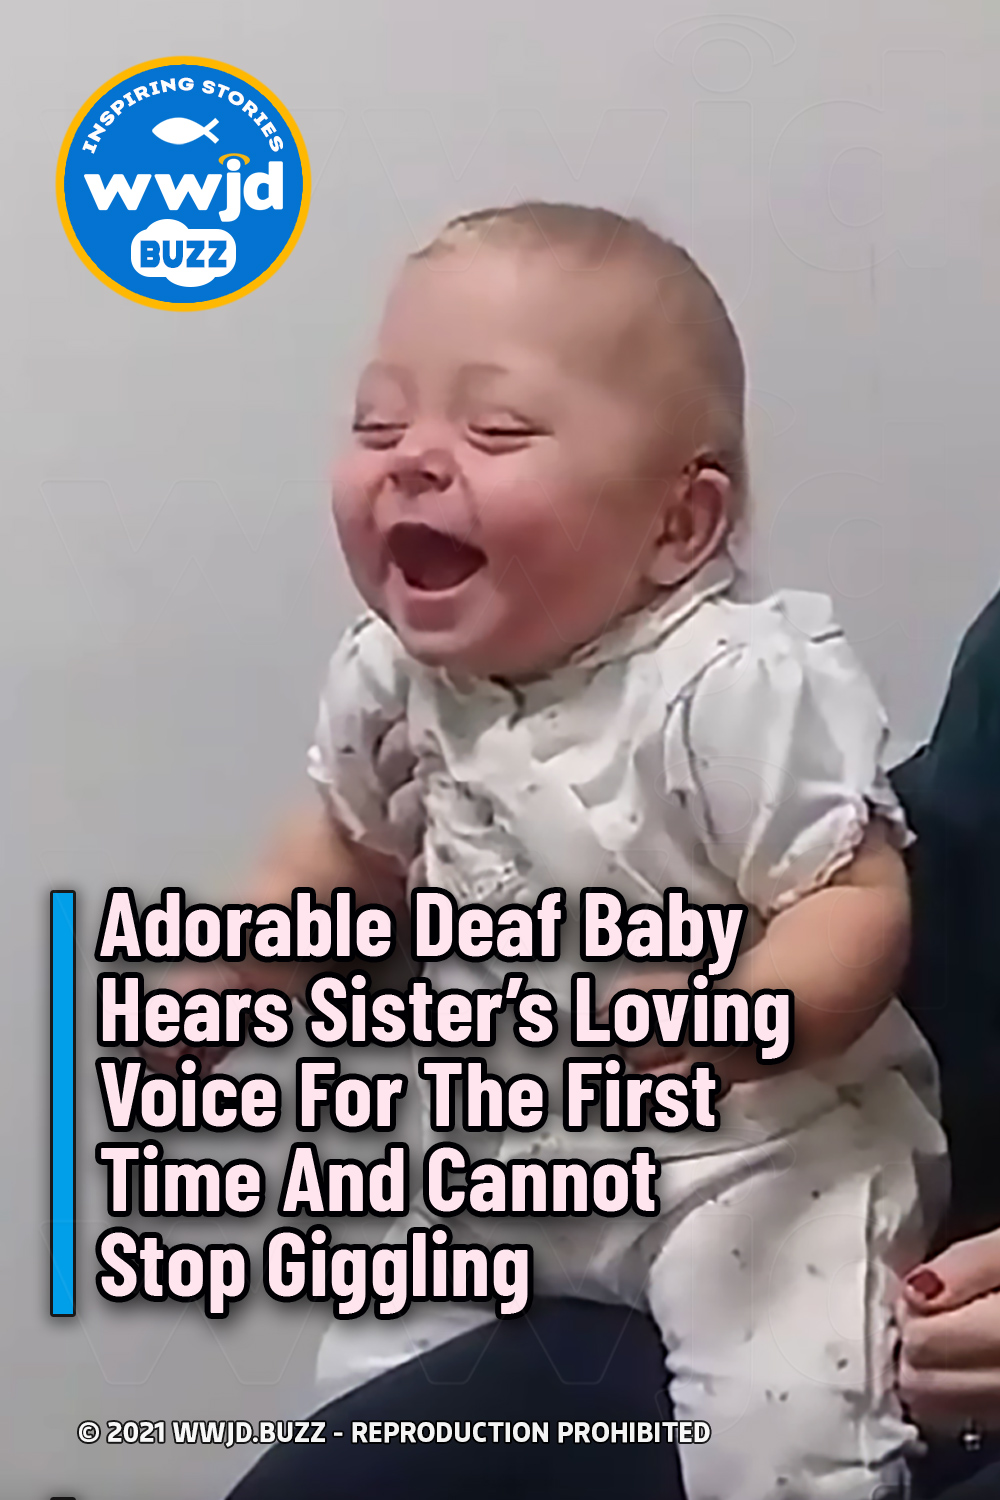 Adorable Deaf Baby Hears Sister’s Loving Voice For The First Time And Cannot Stop Giggling